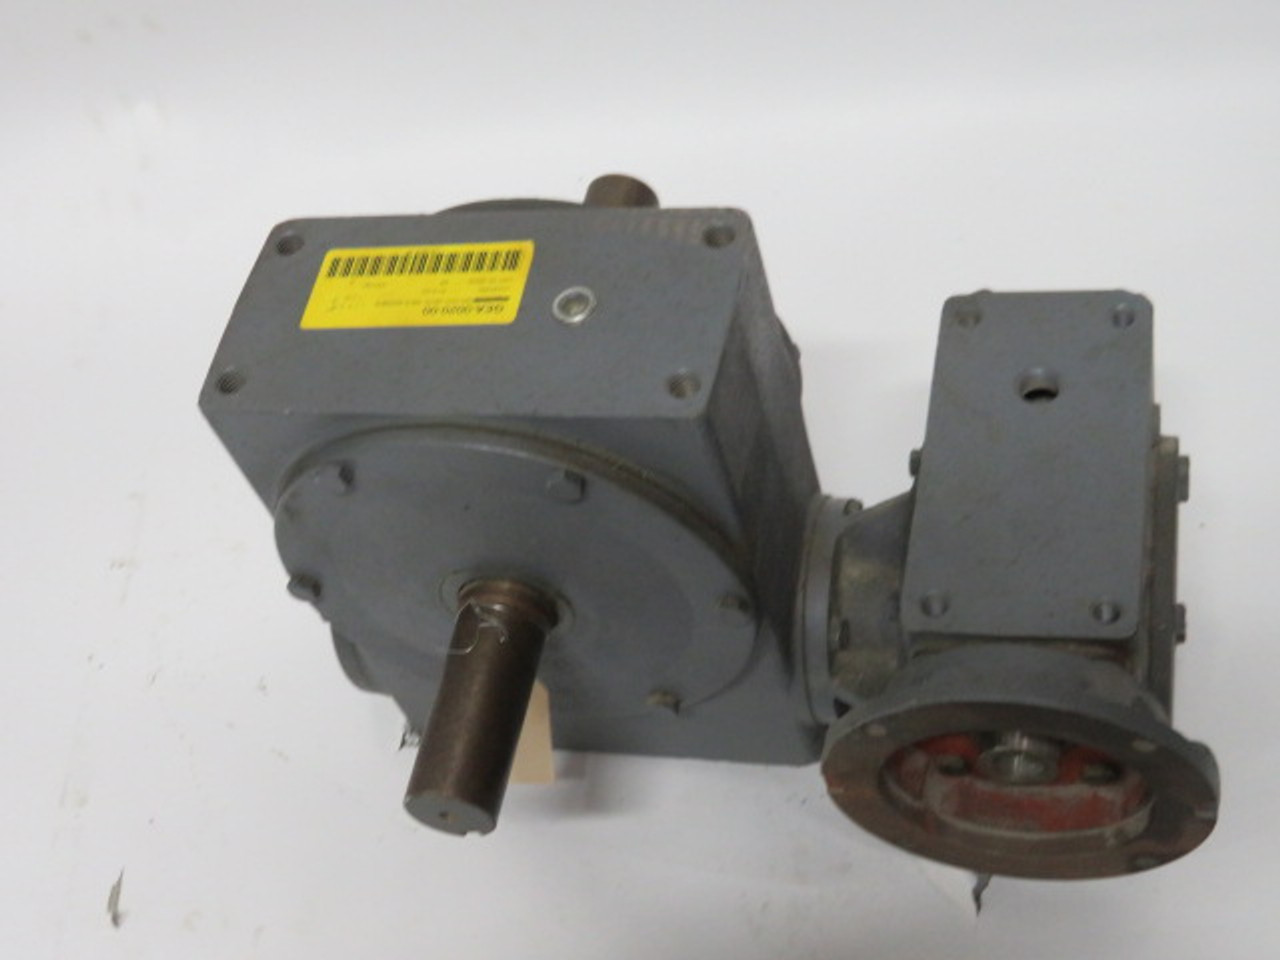 Hub City 0220-70793-450 Gear Reducer Assembly 200:1 Ratio USED